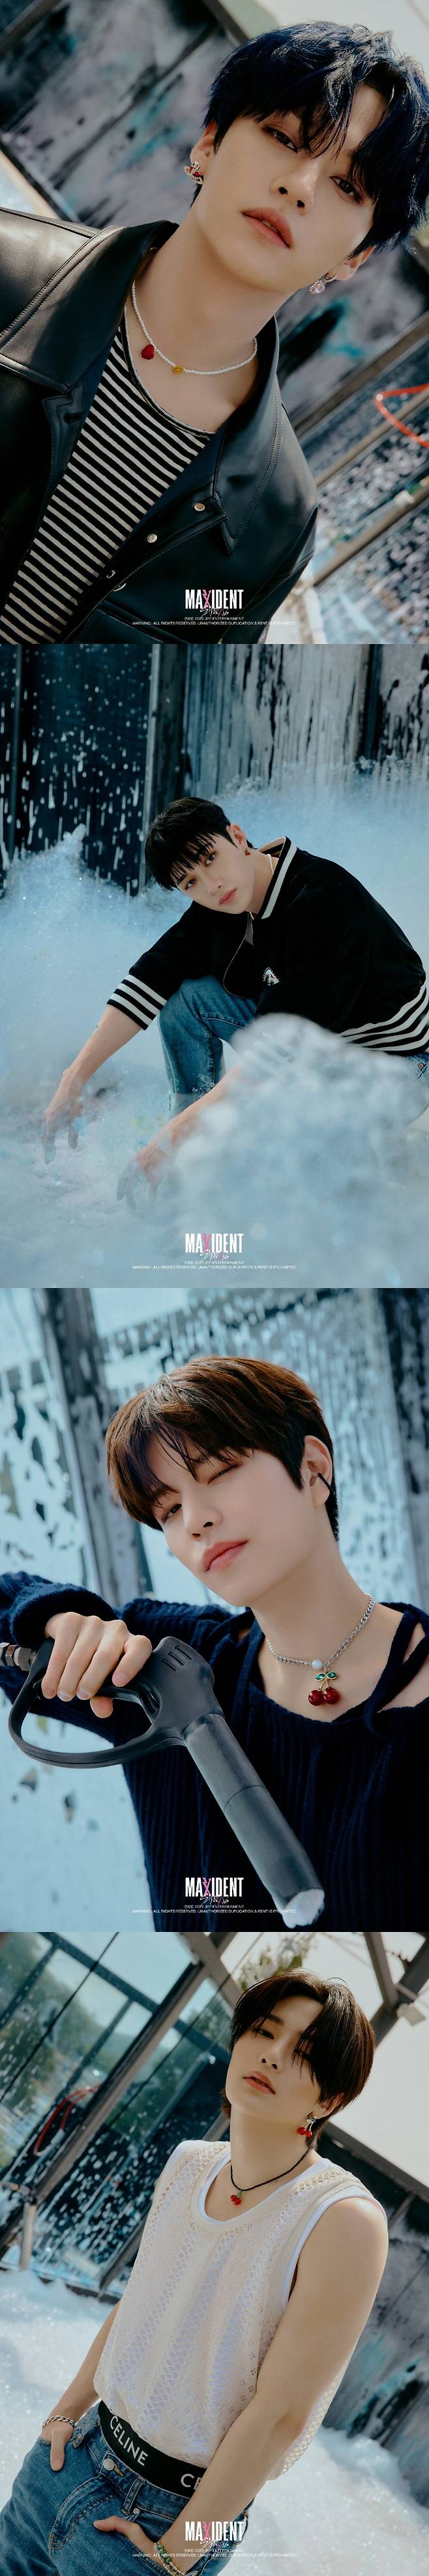 Stray Kids will release their new mini album MAXIDENT and the title song CASE 143 (Case 143) at 1 p.m. on October 7.On the 24th, he presented eight personal images at midnight.The new song CASE 143 is a love song that Stray Kids is the first to show as a title song.I likened the feelings of love to event occurrence and there were witty expressions unique to Stray Kids throughout the song.The groups production team, Three Lacha (3RACHA), wrote and composed by Bang Chan, Chang Bin and Han to enhance musical perfection.Meanwhile, Stray Kids will release their new mini-album MAXIDENT and the title track CASE 143 at 1 p.m. on October 7 (00:00 as of Eastern time in the United States).